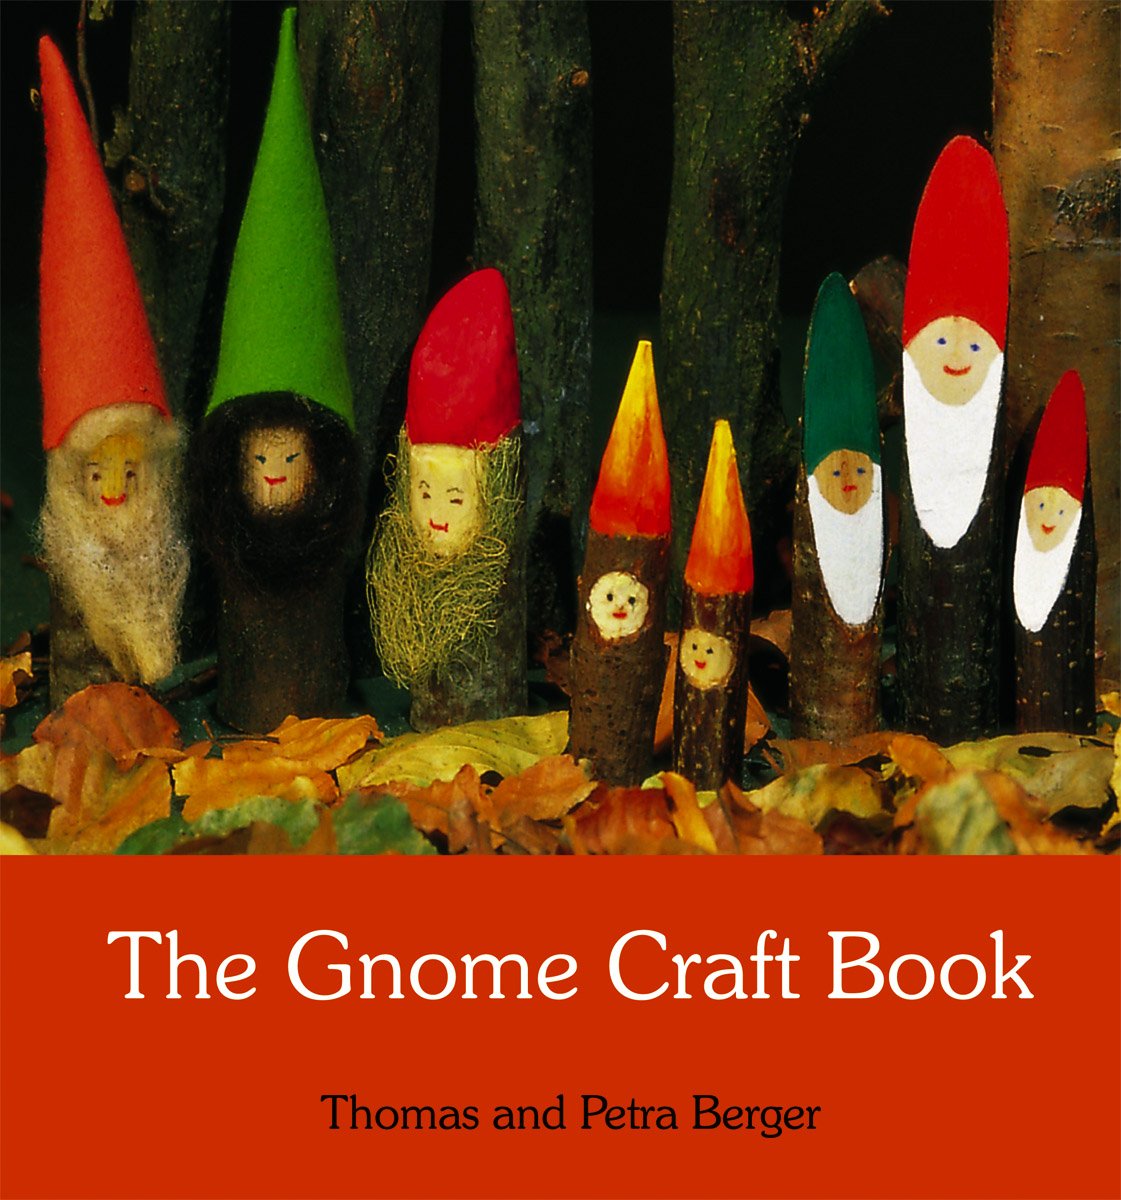 The Gnome Craft Book  by Thomas and Petra Berger